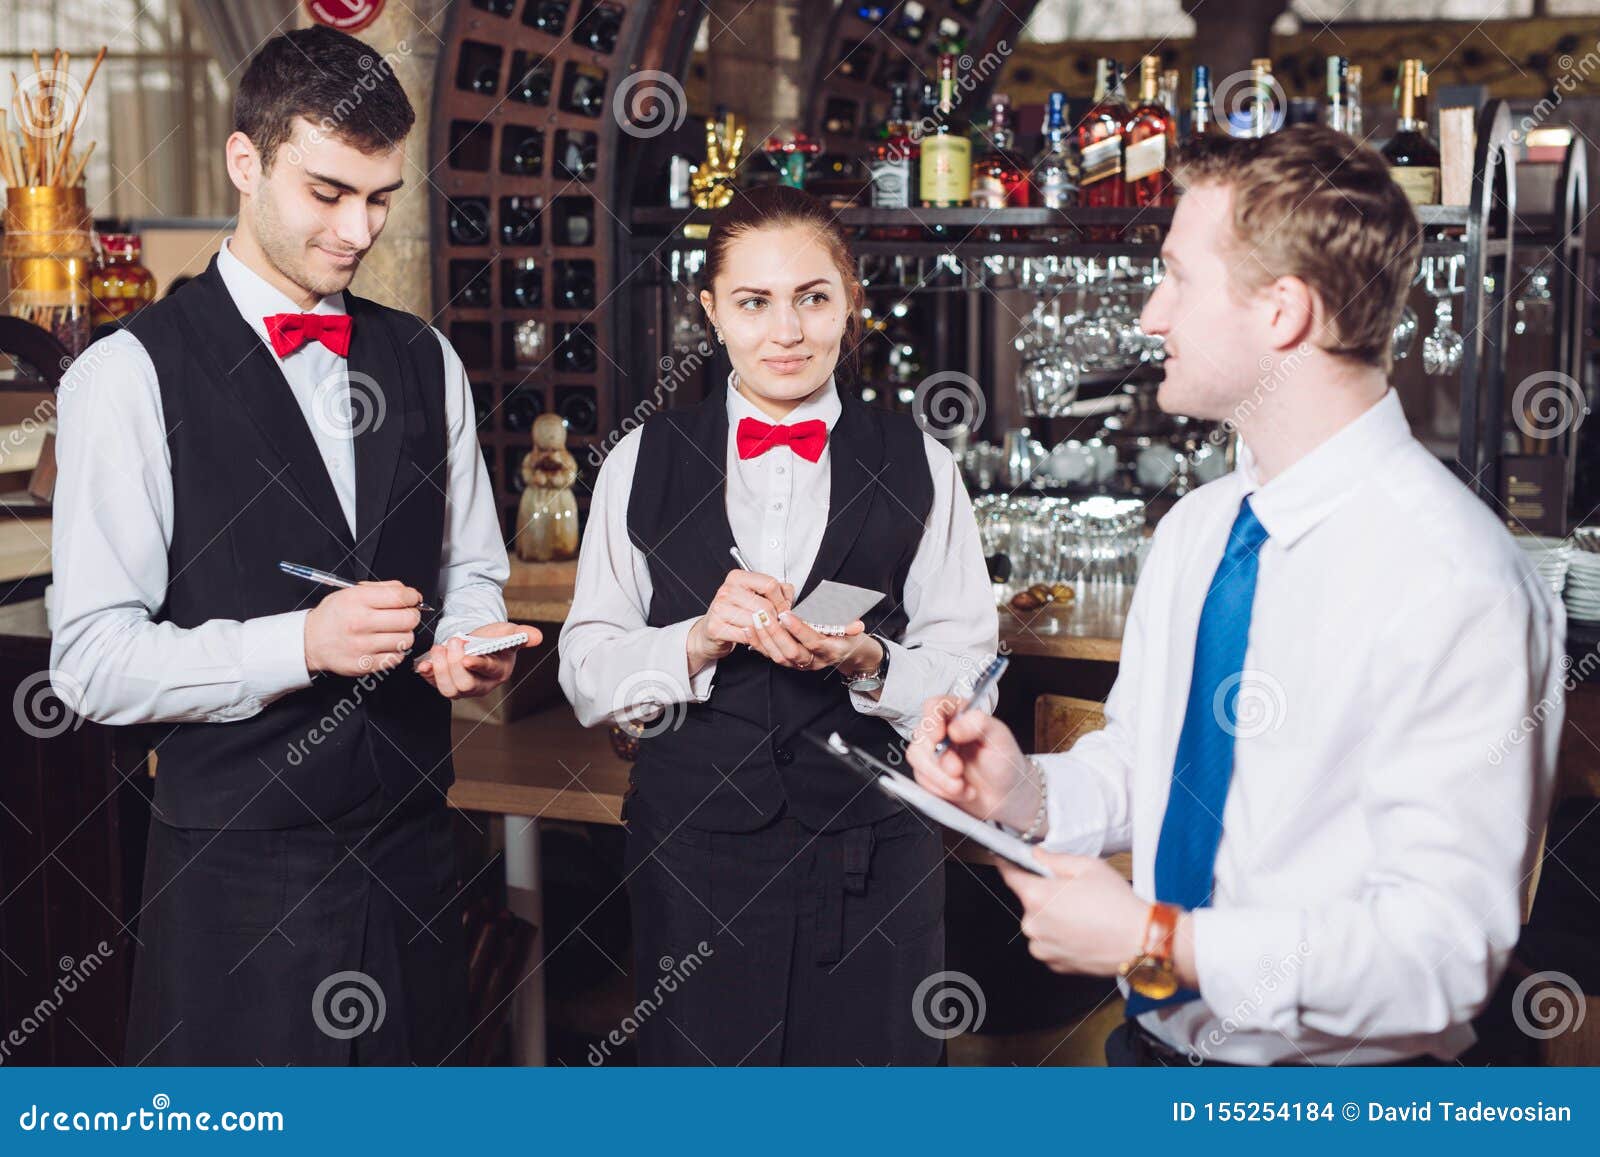 manager`s briefing with the waiters. restaurant manager and his staff